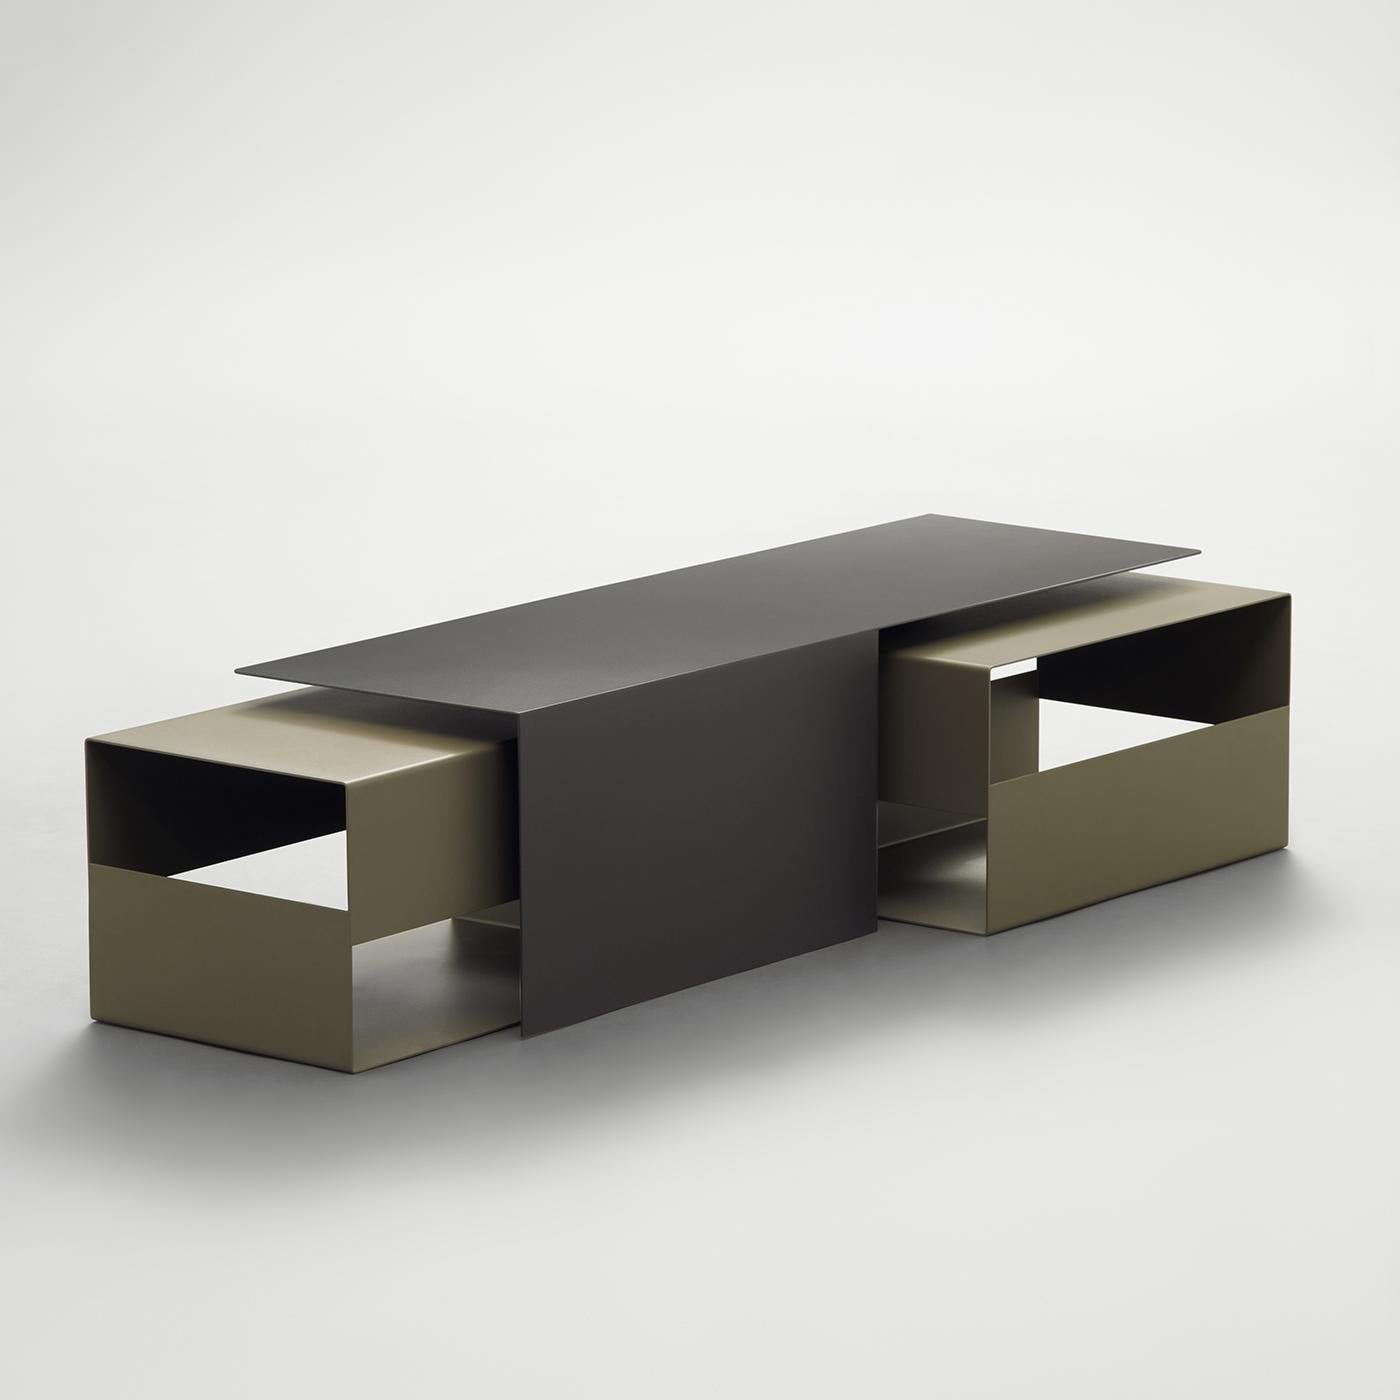 A splendid piece of sculptural allure, this coffee table will make a bold statement in any indoor or outdoor contemporary decor. Crafted of steel, its geometric silhouette is marked by removable containers boasting a matte gray finish, in elegant